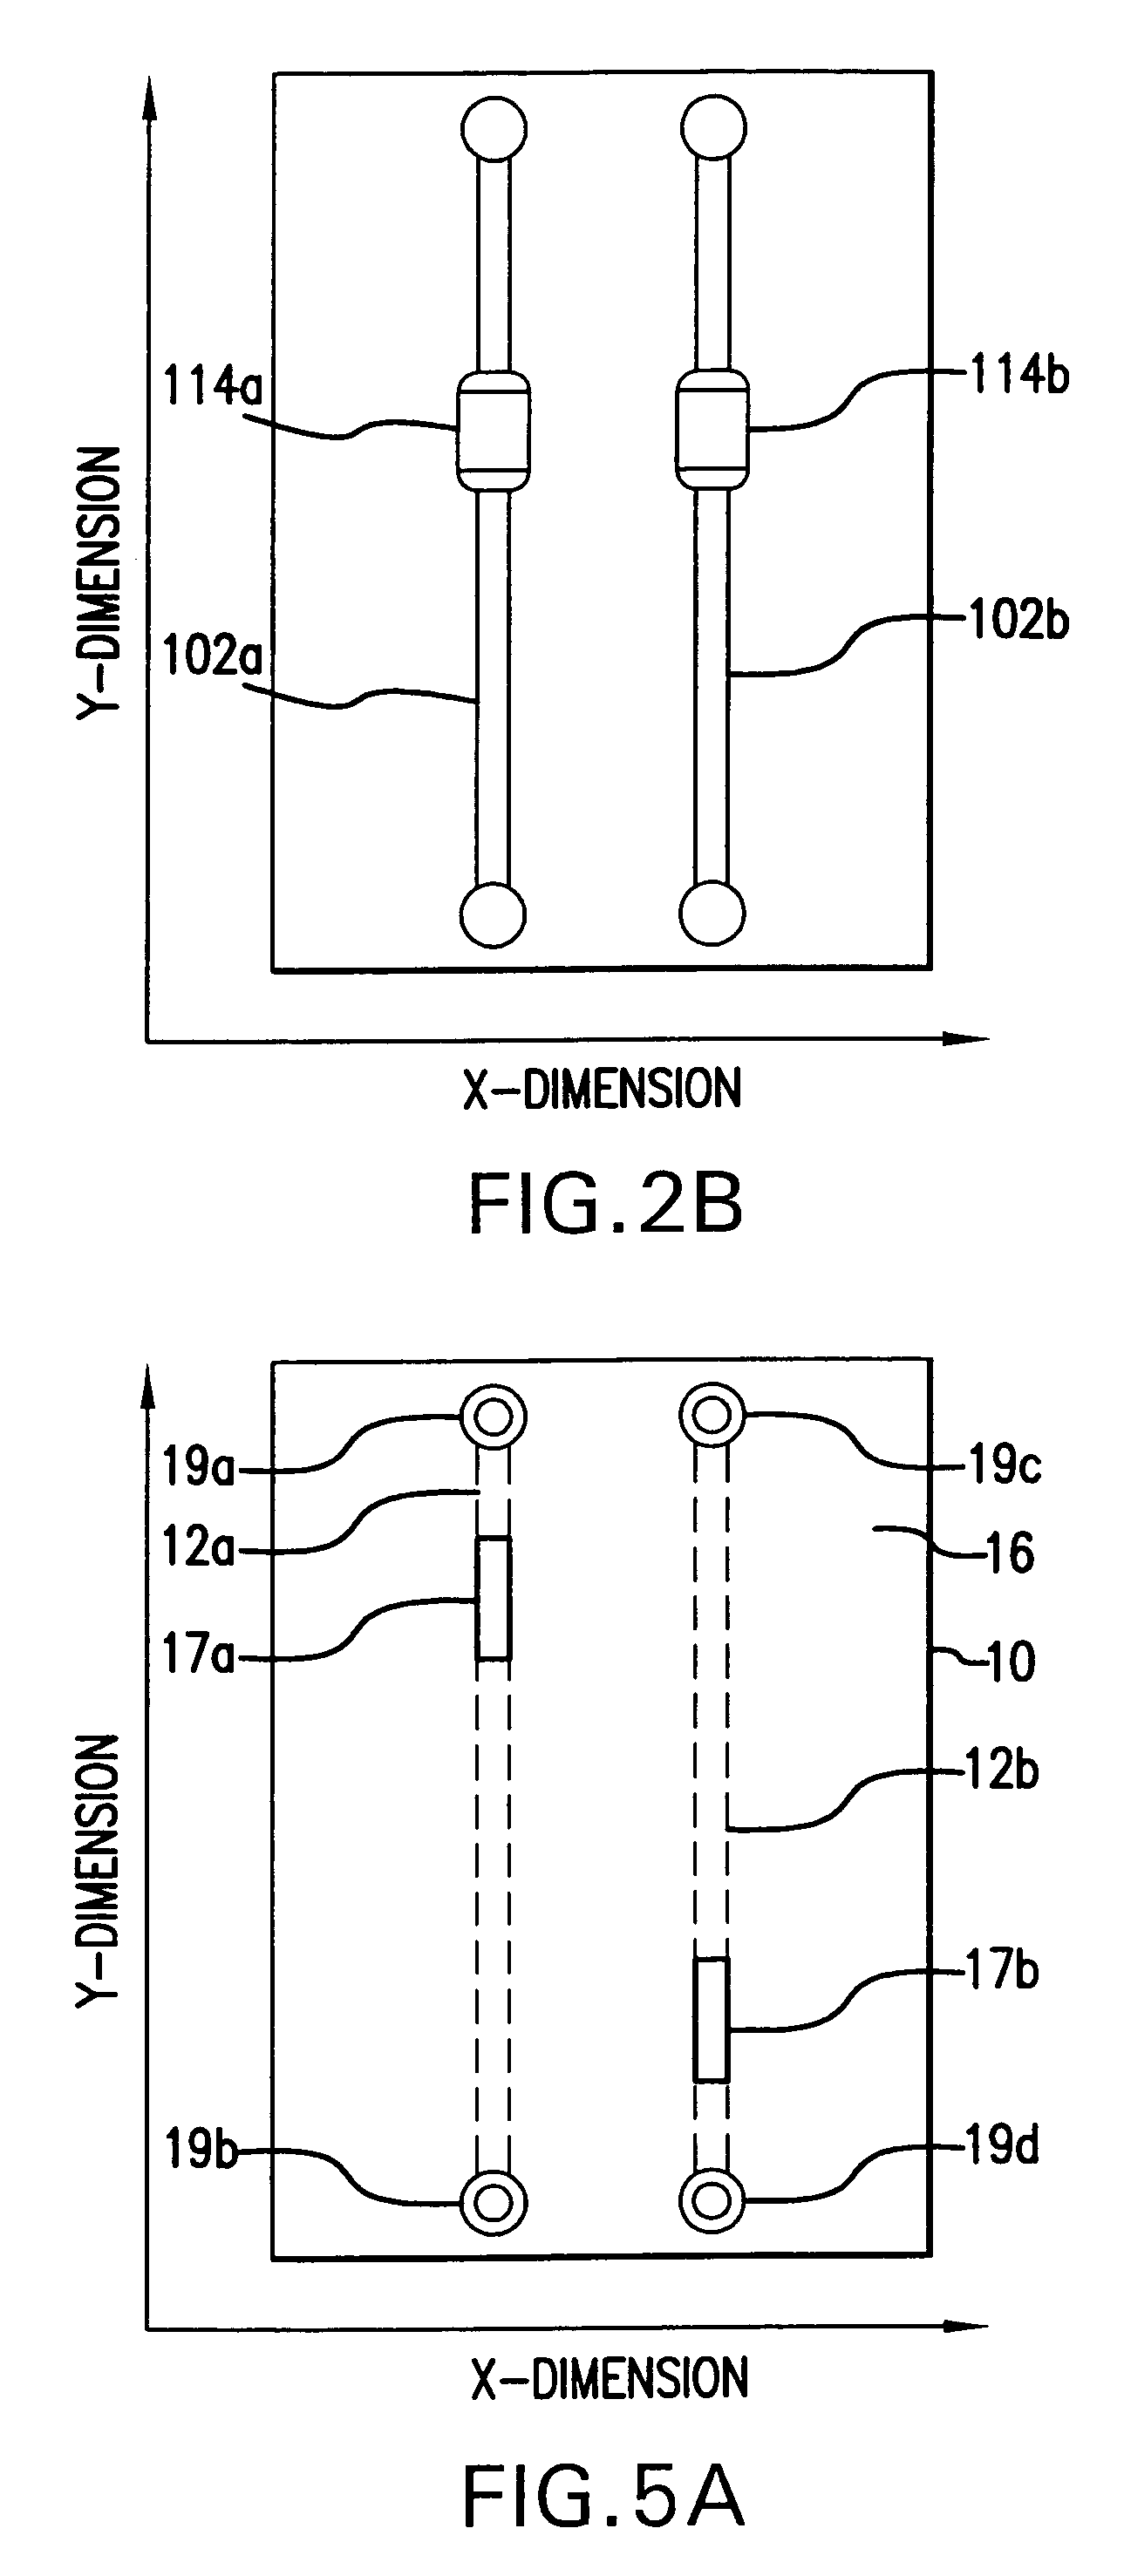 Method and apparatus for manufacturing and probing printed circuit board test access point structures